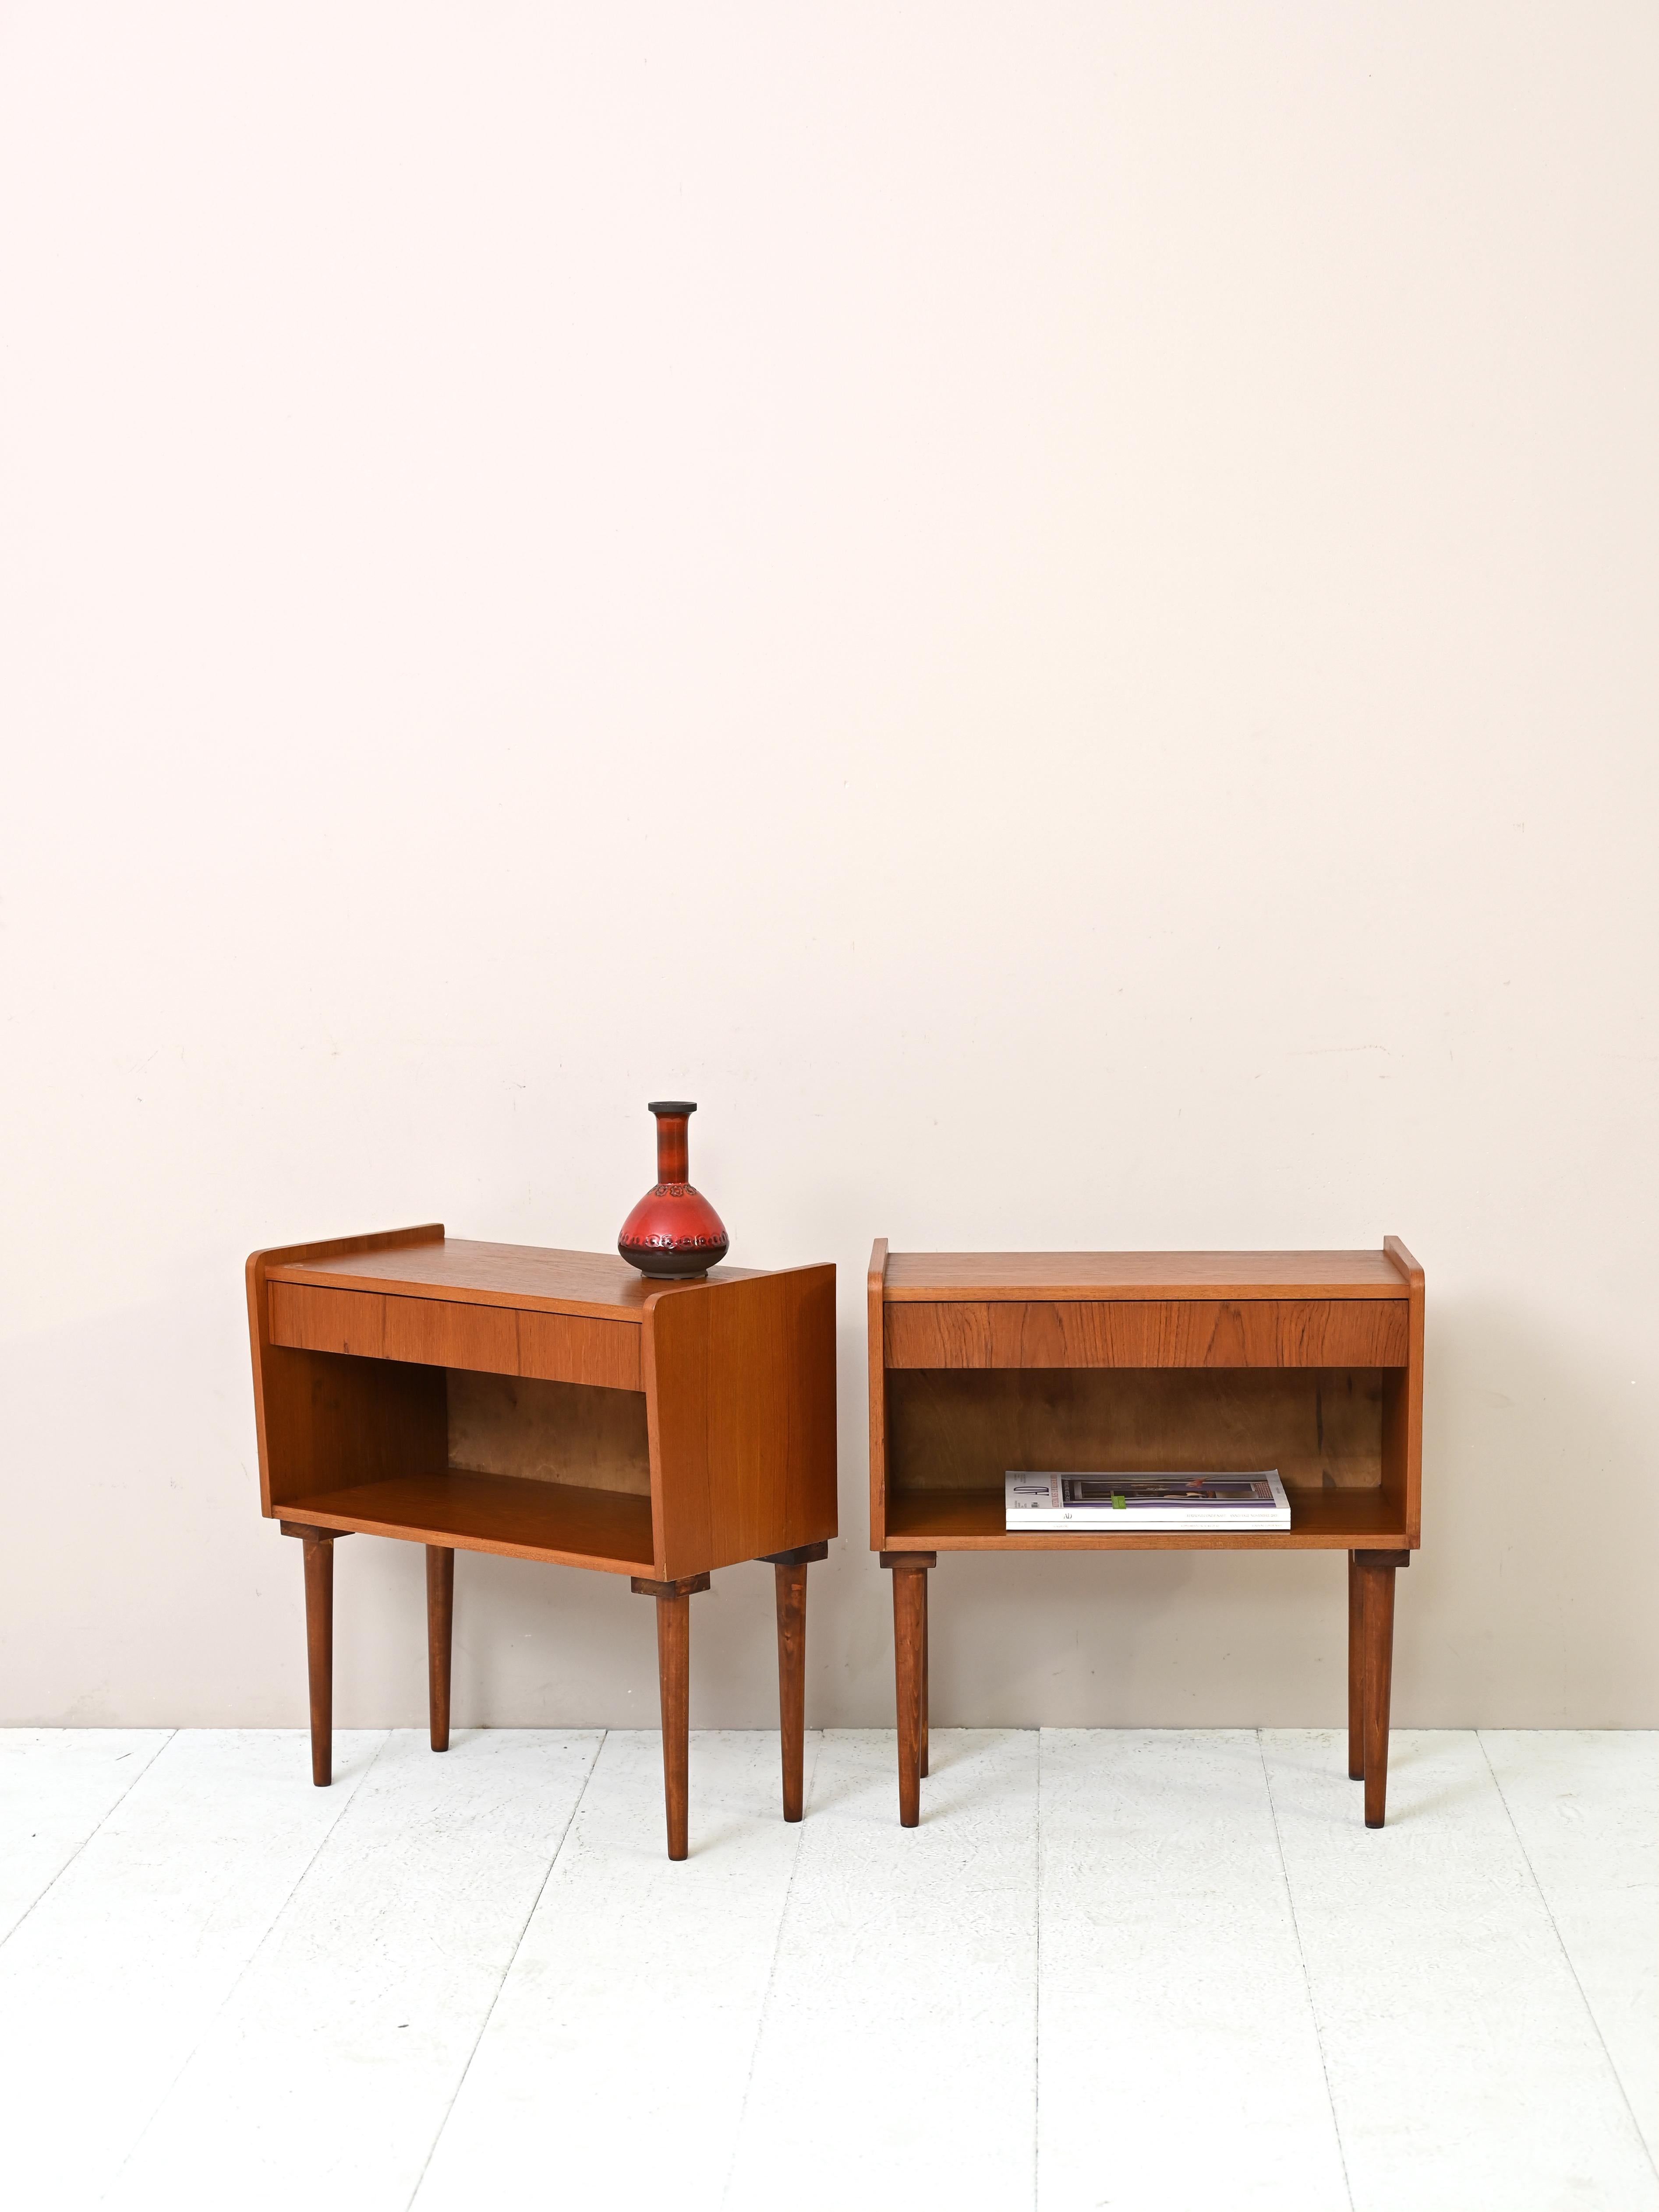 Pair of vintage Scandinavian teak nightstands. 

Regular, tapered lines for these 1950s nightstands with timeless beauty.

Equipped with a drawer and a useful shelf underneath, they will be an essential addition to the bedroom.

Good